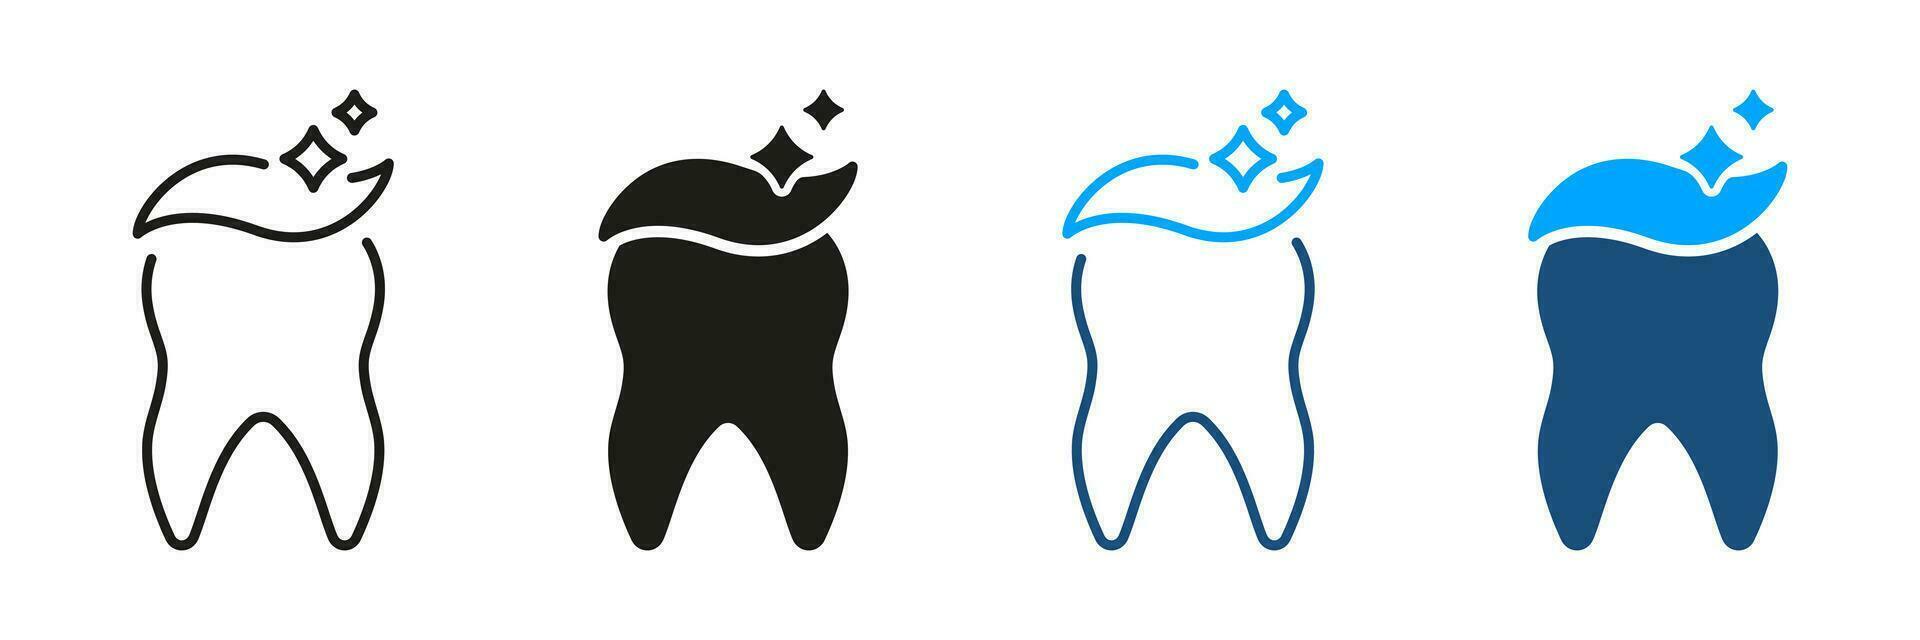 Tooth Cleaning Silhouette and Line Icon Set. Dental Treatment, Healthy Clean Teeth. Dental Hygiene with Toothpaste Pictogram. Orthodontic Healthcare Symbol Collection. Isolated Vector Illustration.